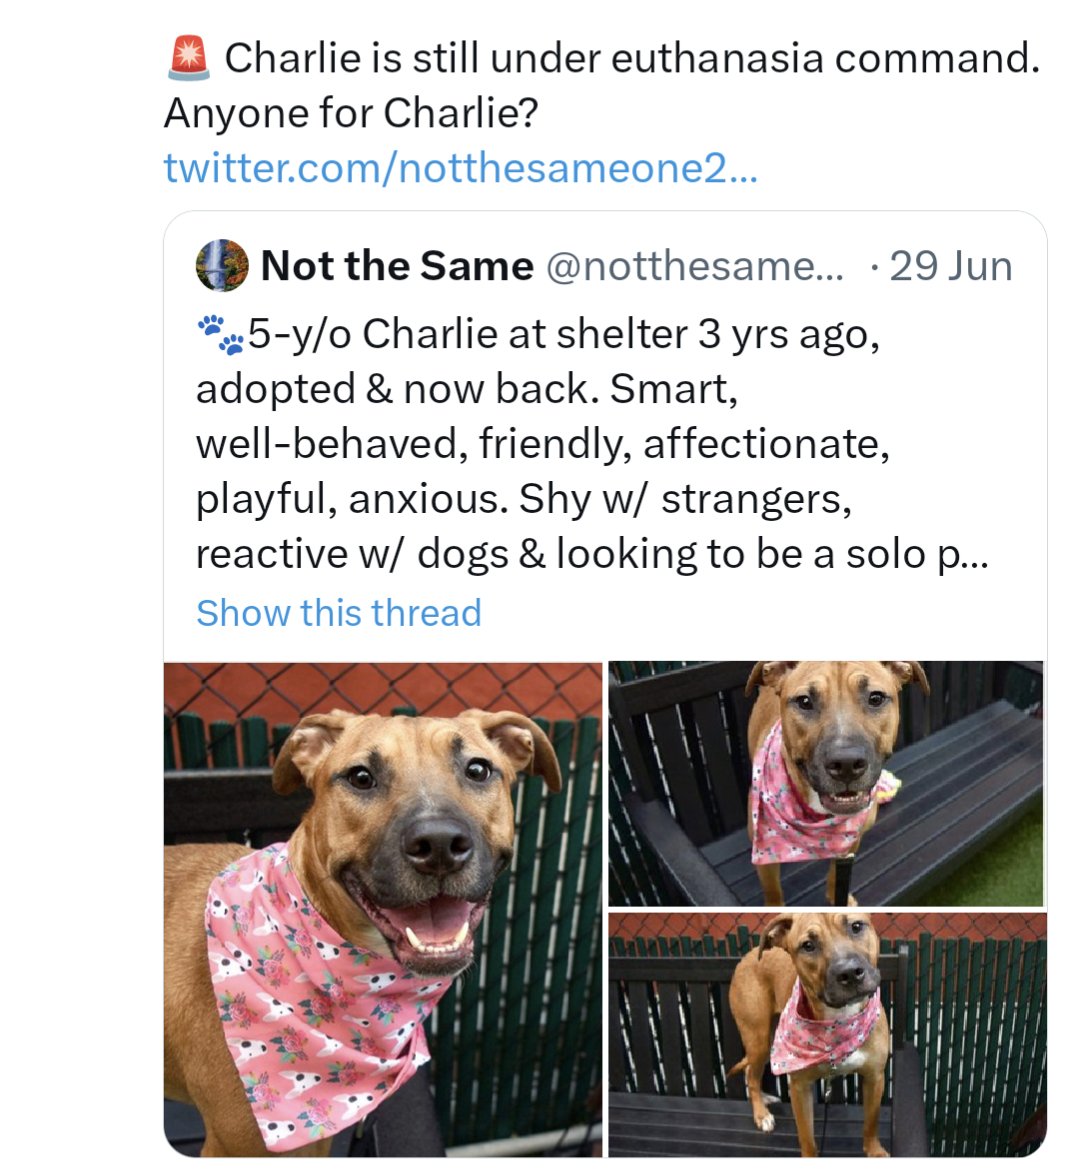 Euth command given. She needs out ASAP! For those interested in her, Charlie is at Animal Care Centers of NYC
#saveashelterdog #nycacc